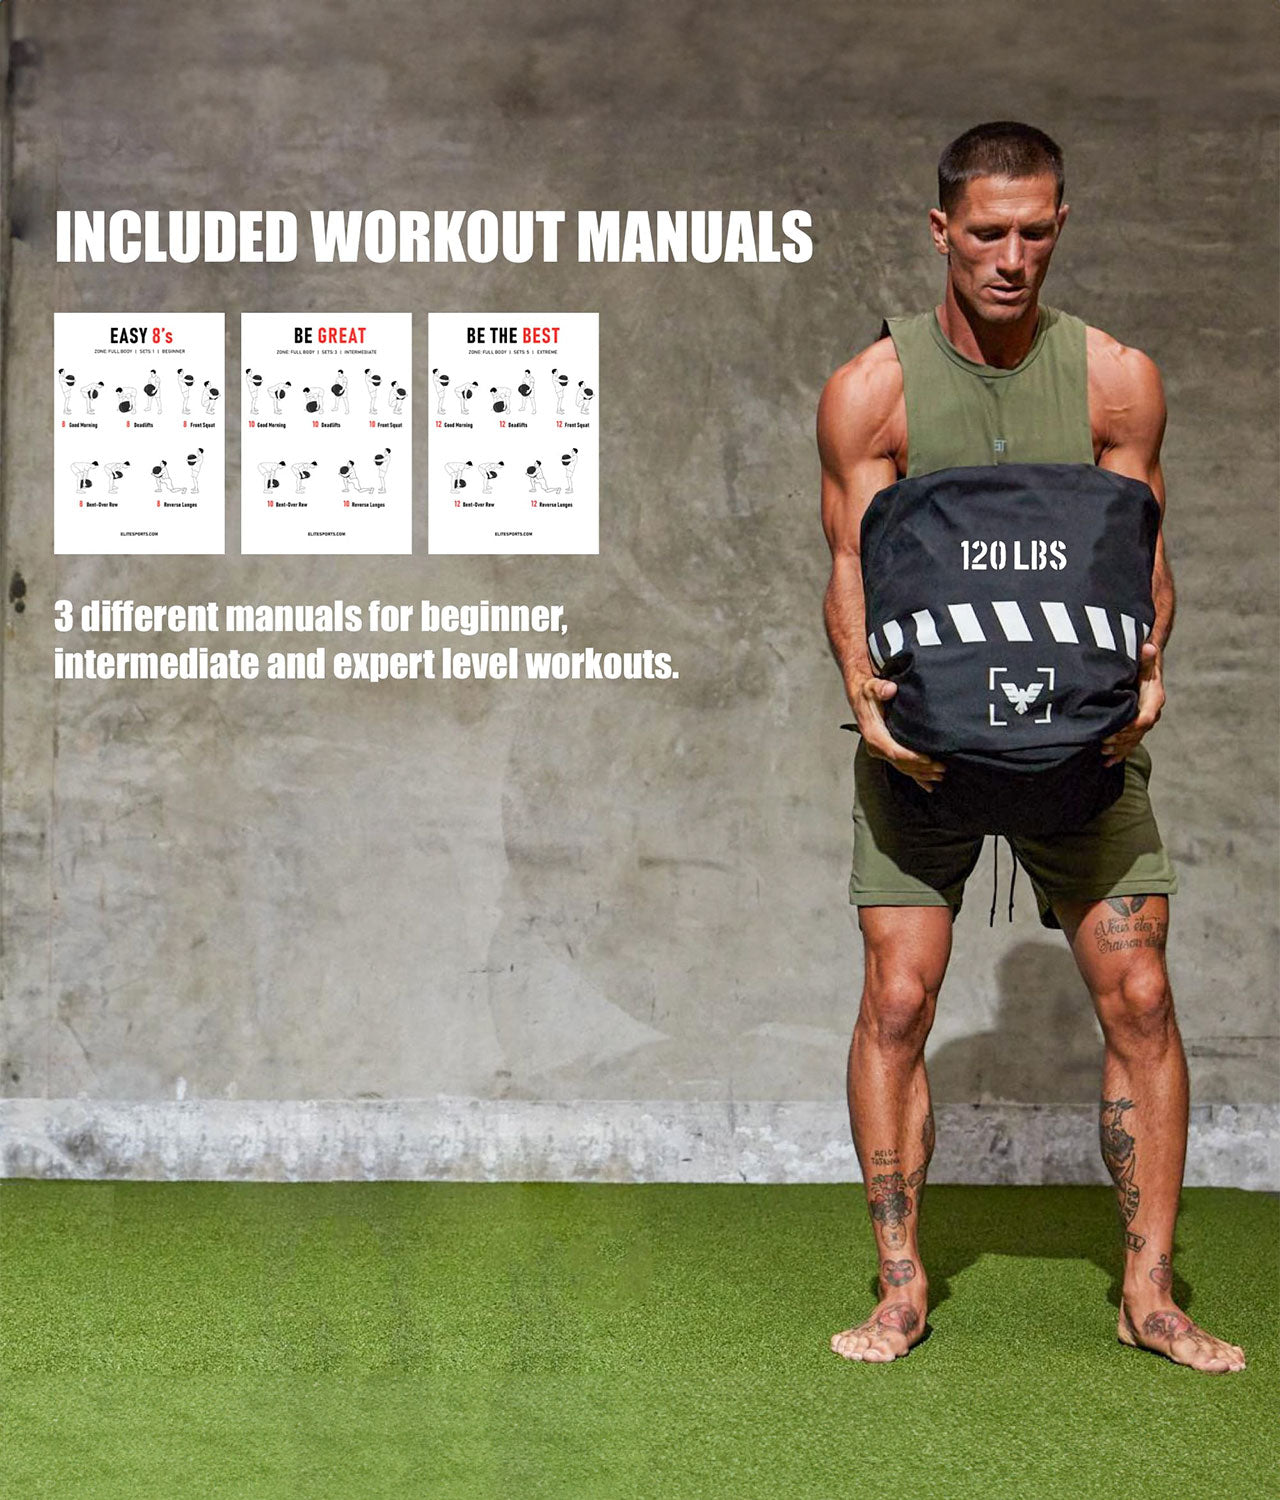 Elite Sports Set of 3 - Core Round Workout Sandbags Included Workout Manuals